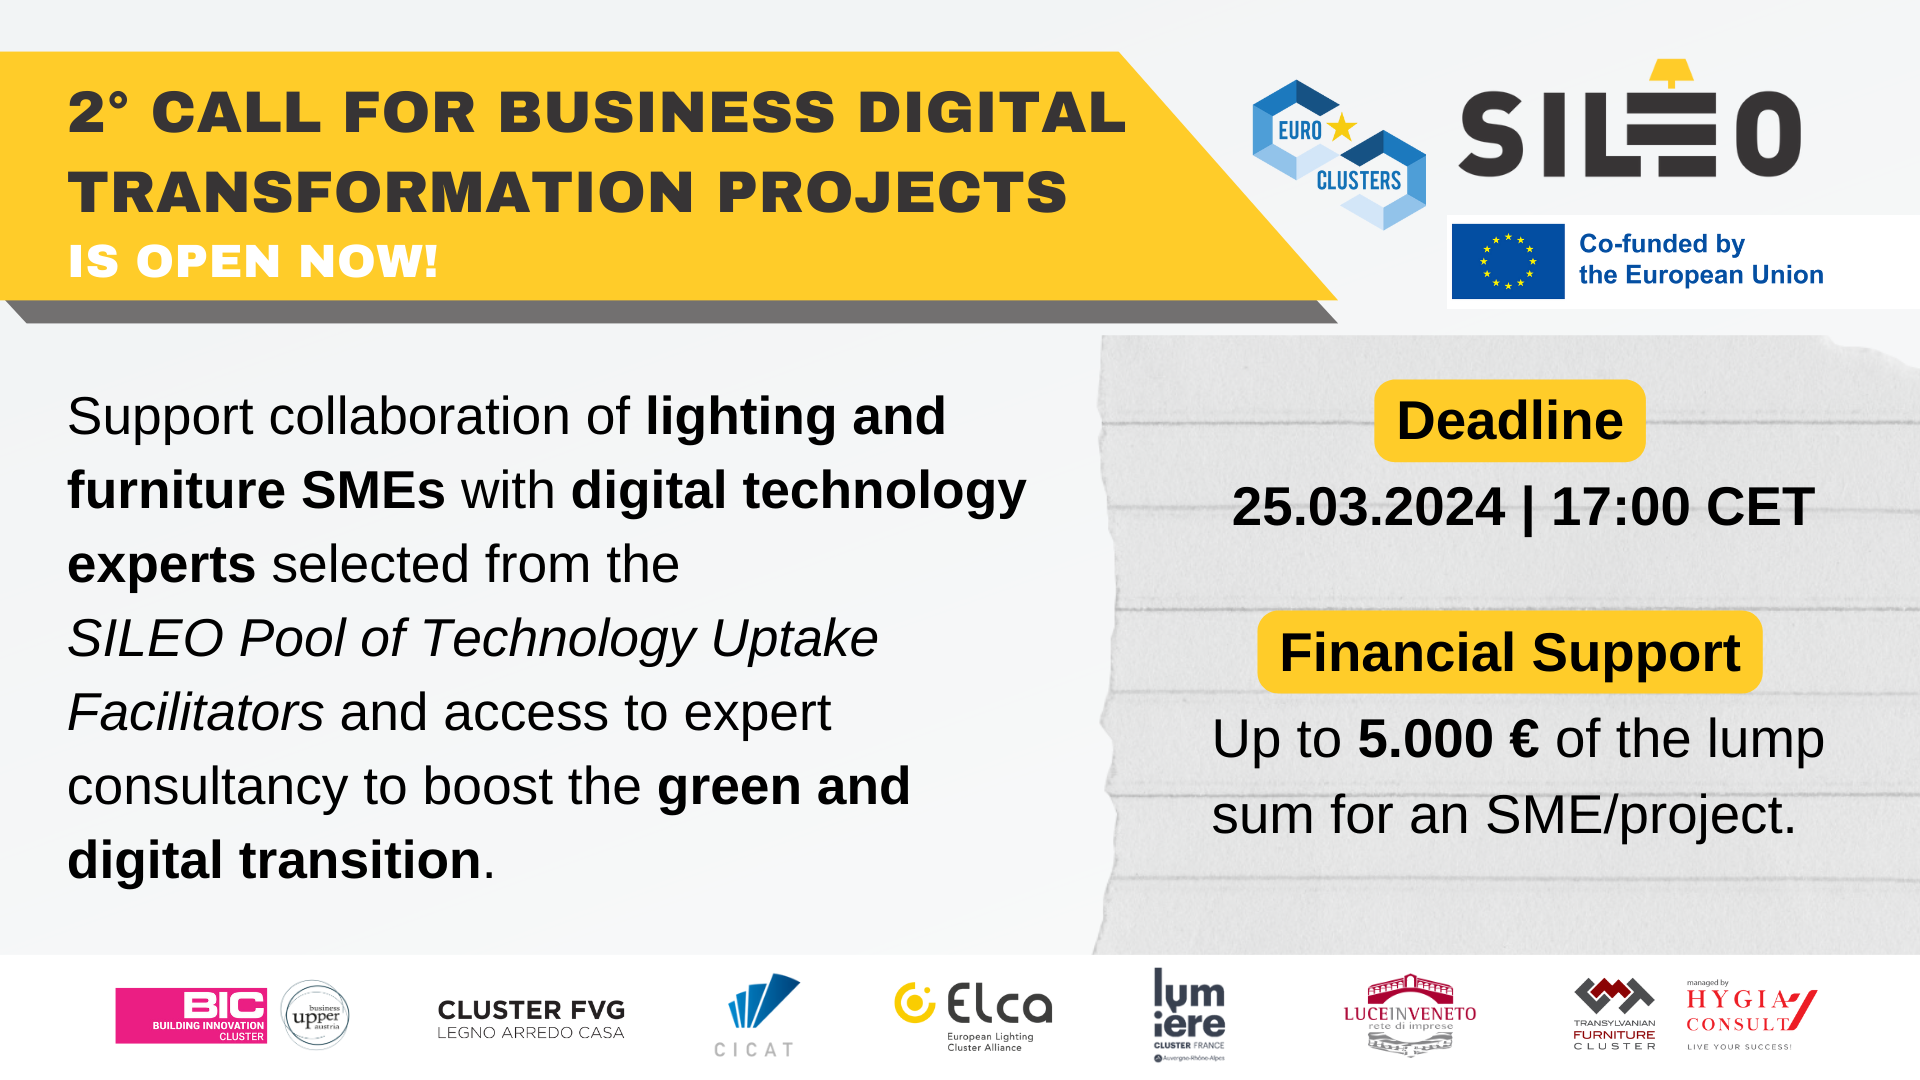 SILEO - Business Digital Transformation Projects